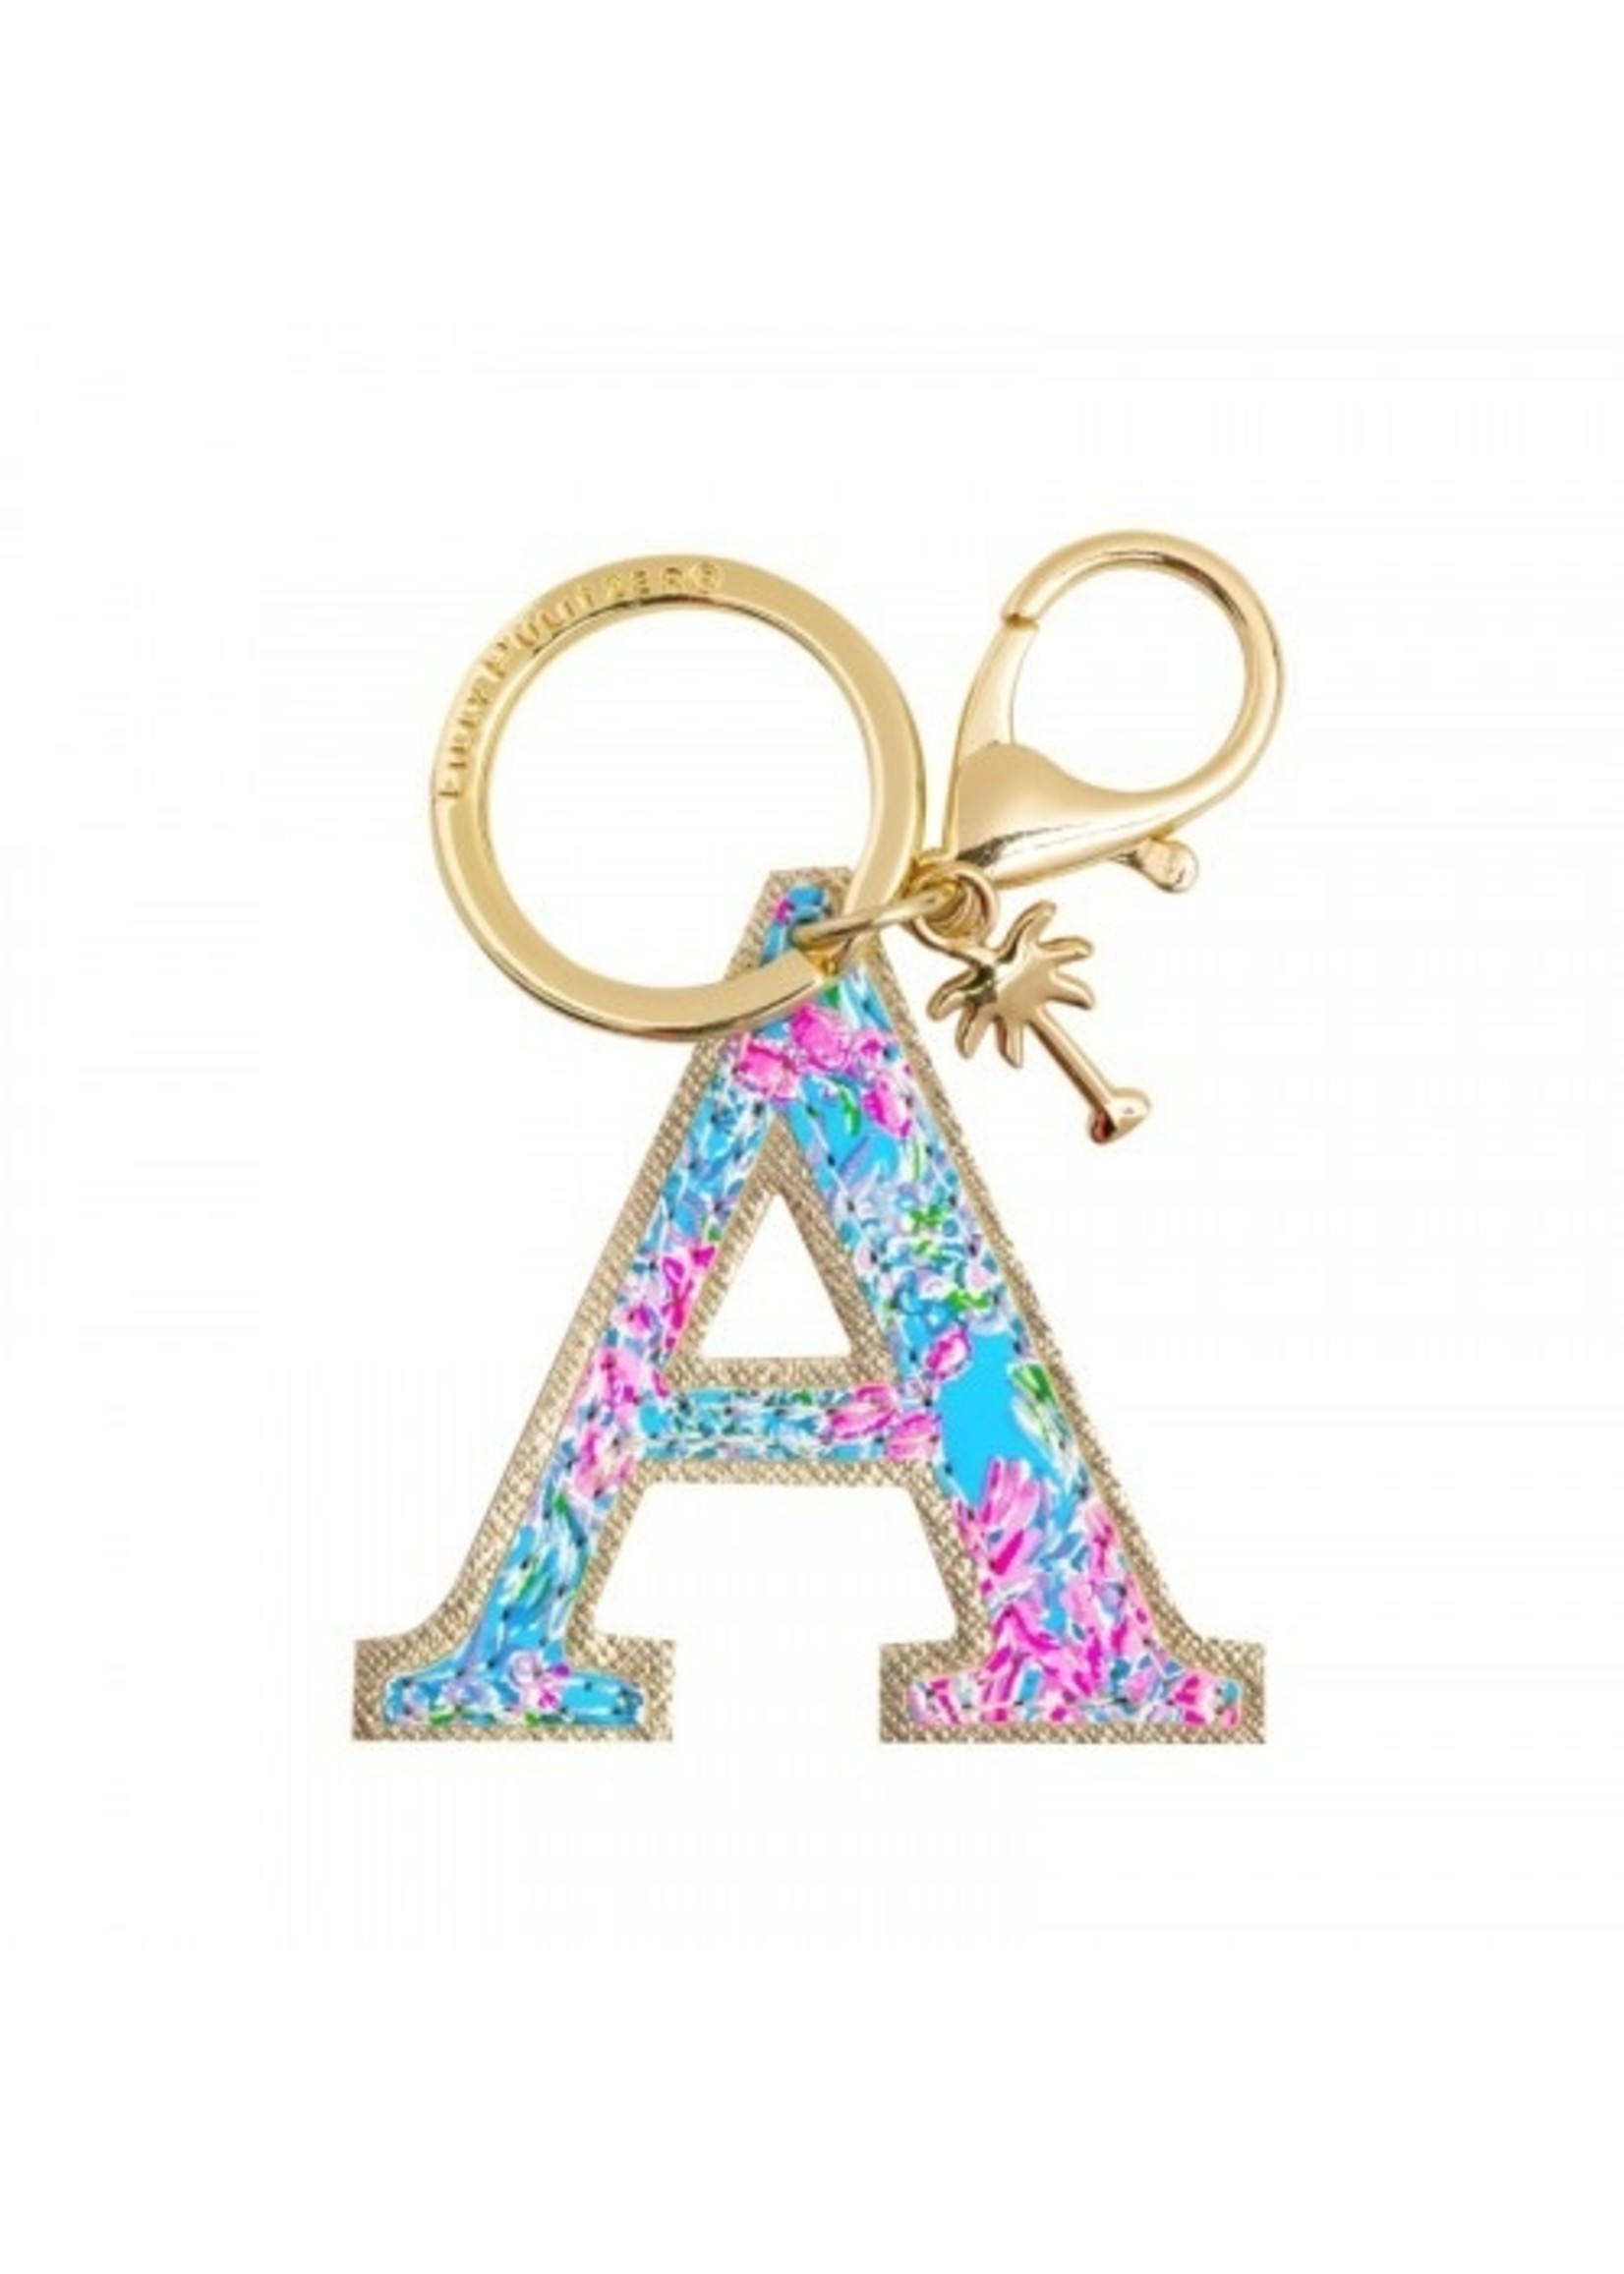 Lilly Pulitzer Initial Key Chain- A